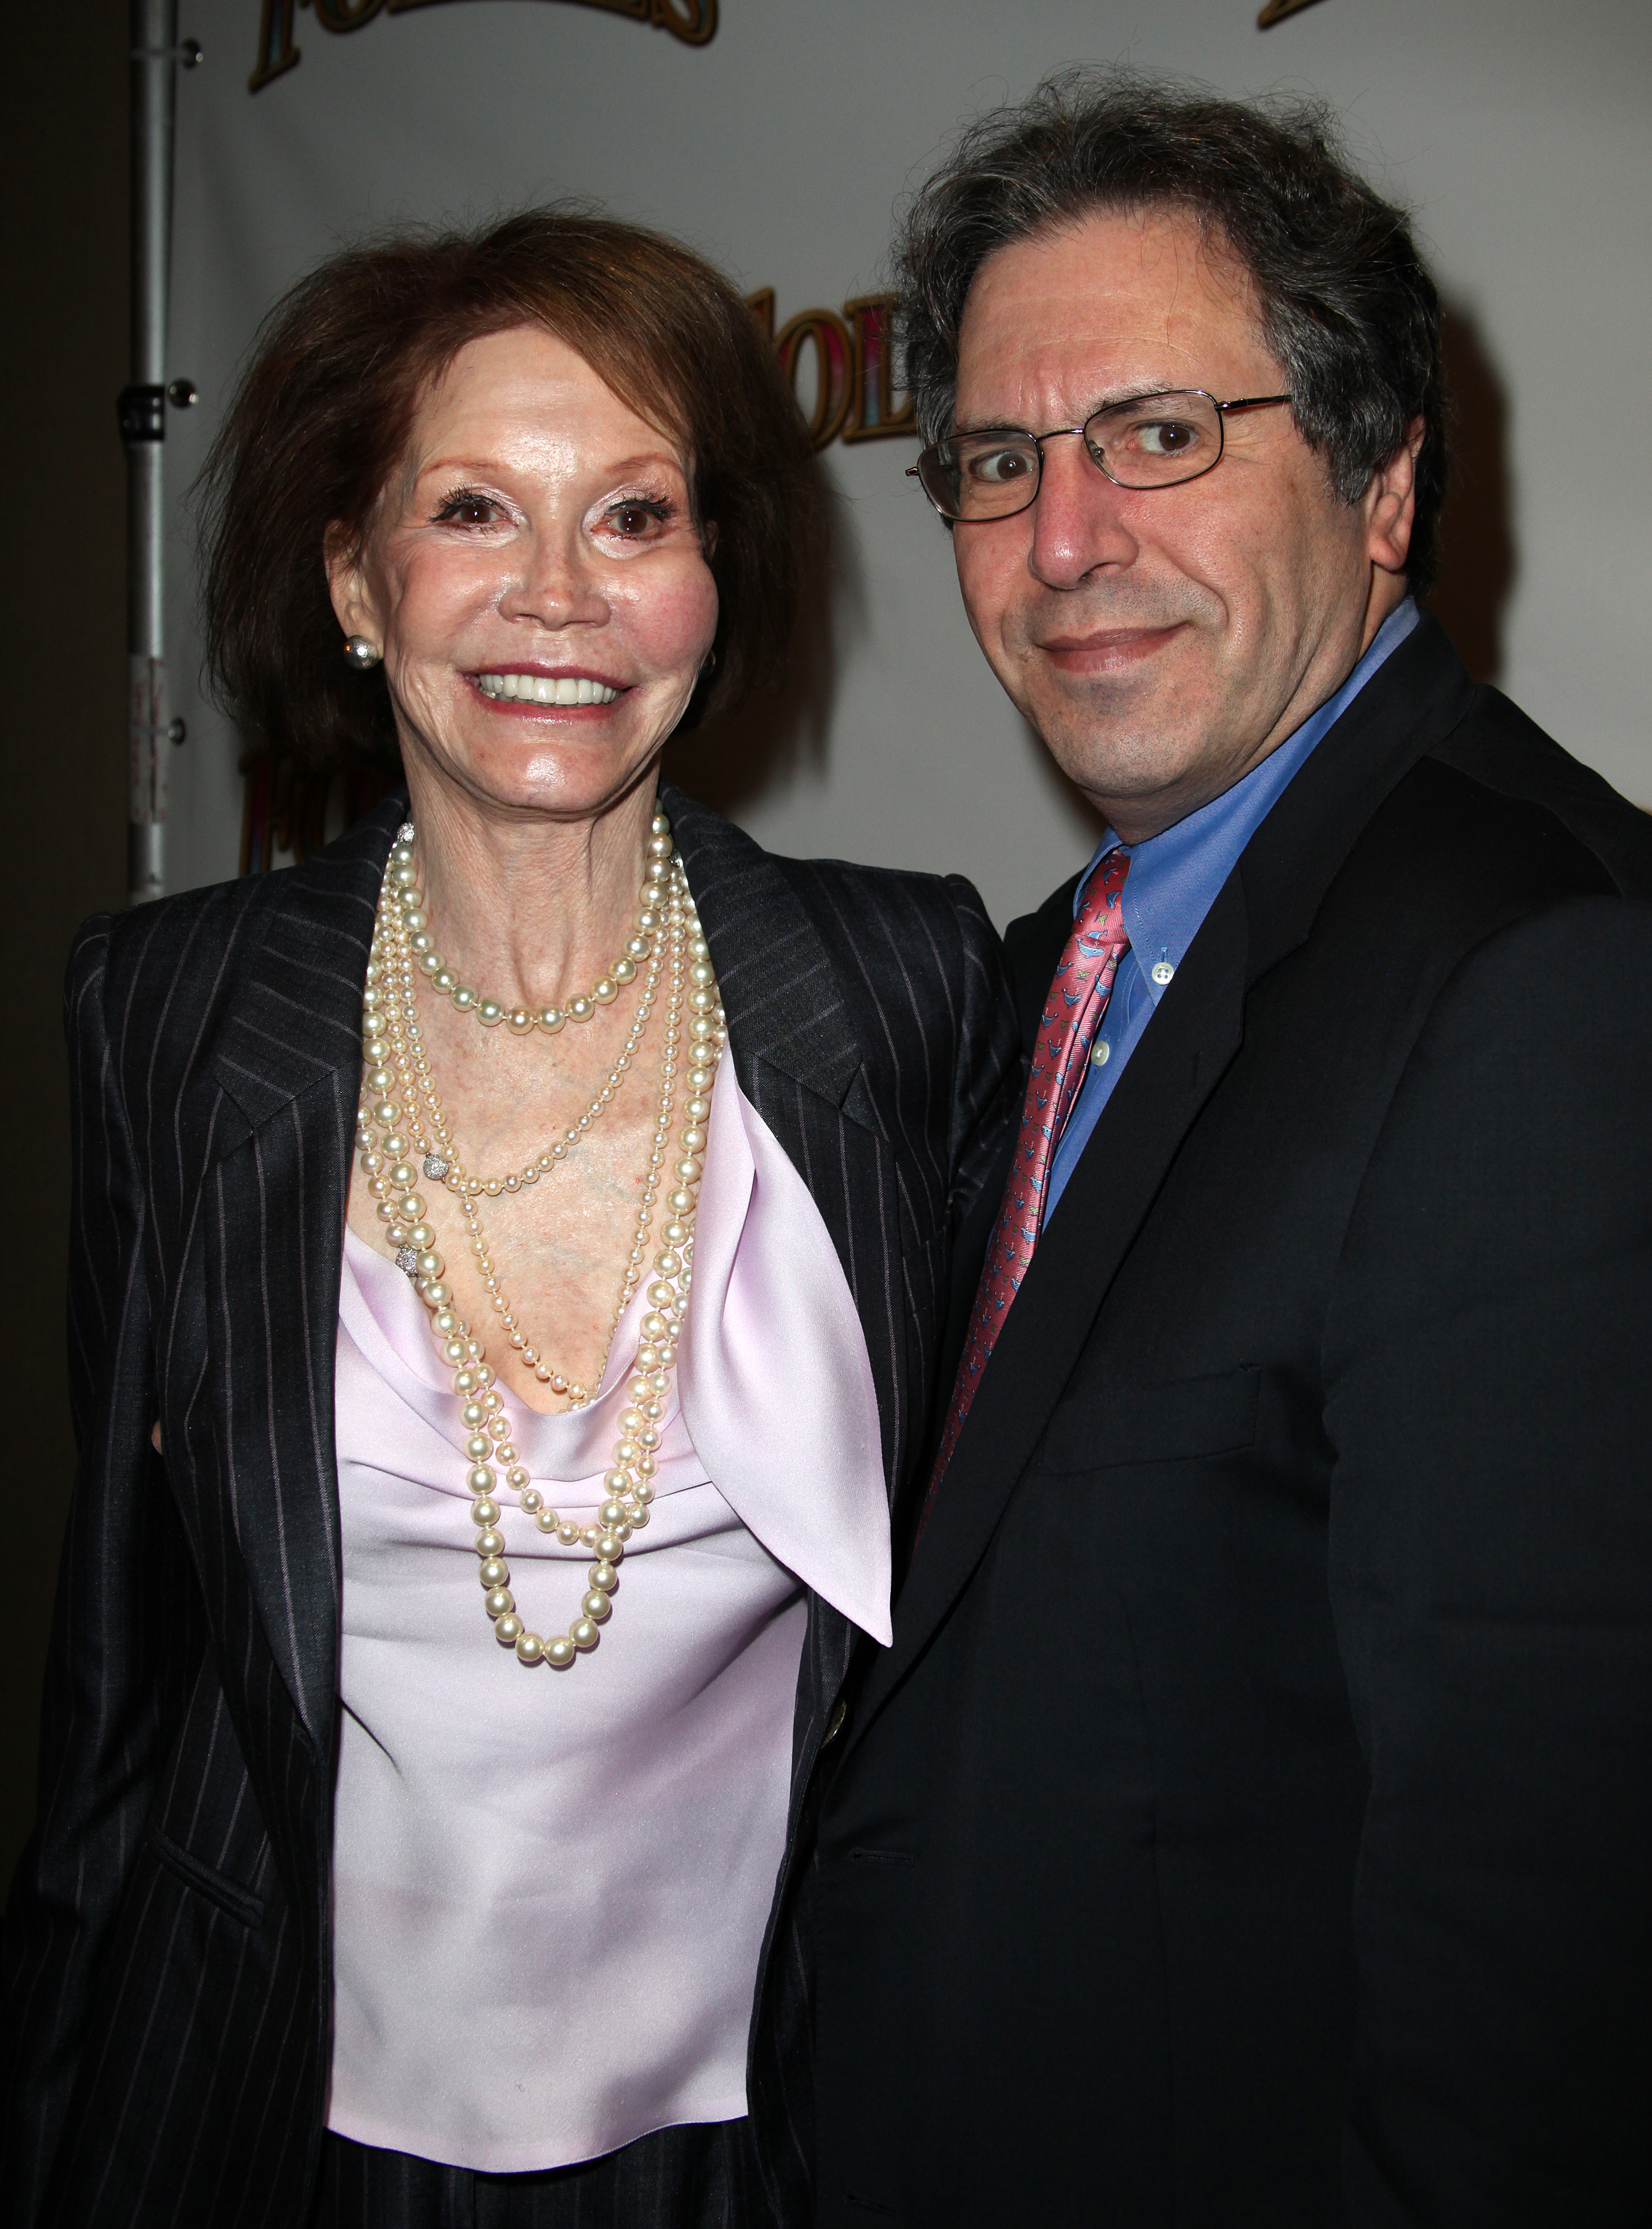 Mary Tyler Moore & husband Dr. Robert Levine, attend the Broadway opening night performance of 'Follies' at the Marquis Theatre in New York City in 2011. | Source: Getty Images